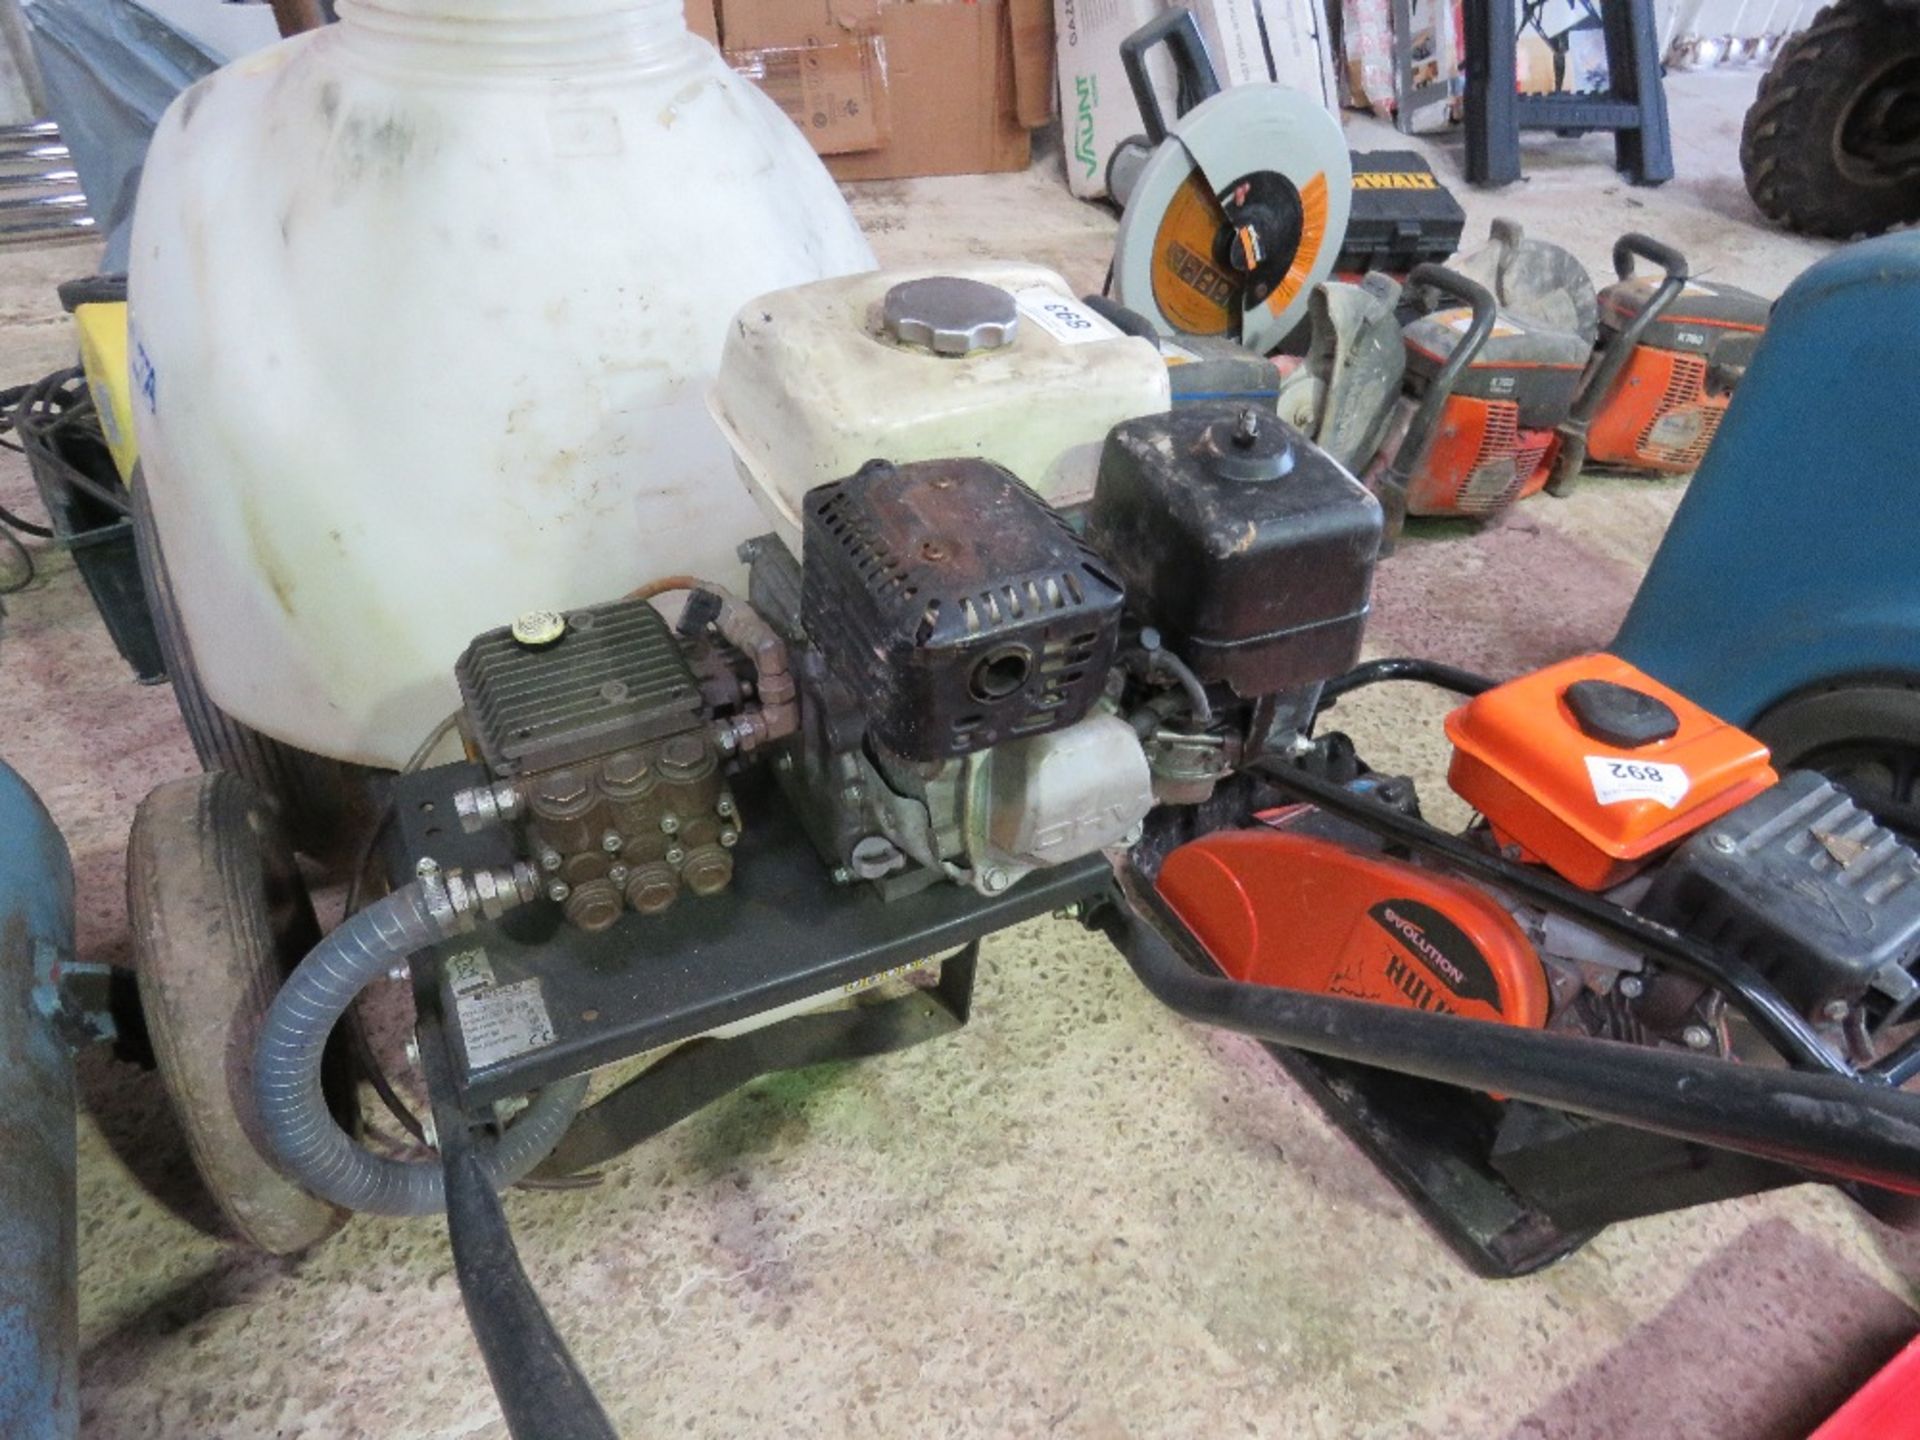 HILTA HONDA ENGINED PRESSURE WASHER BOWSER BARROW WITH EXTRA LONG LANCE. - Image 3 of 9